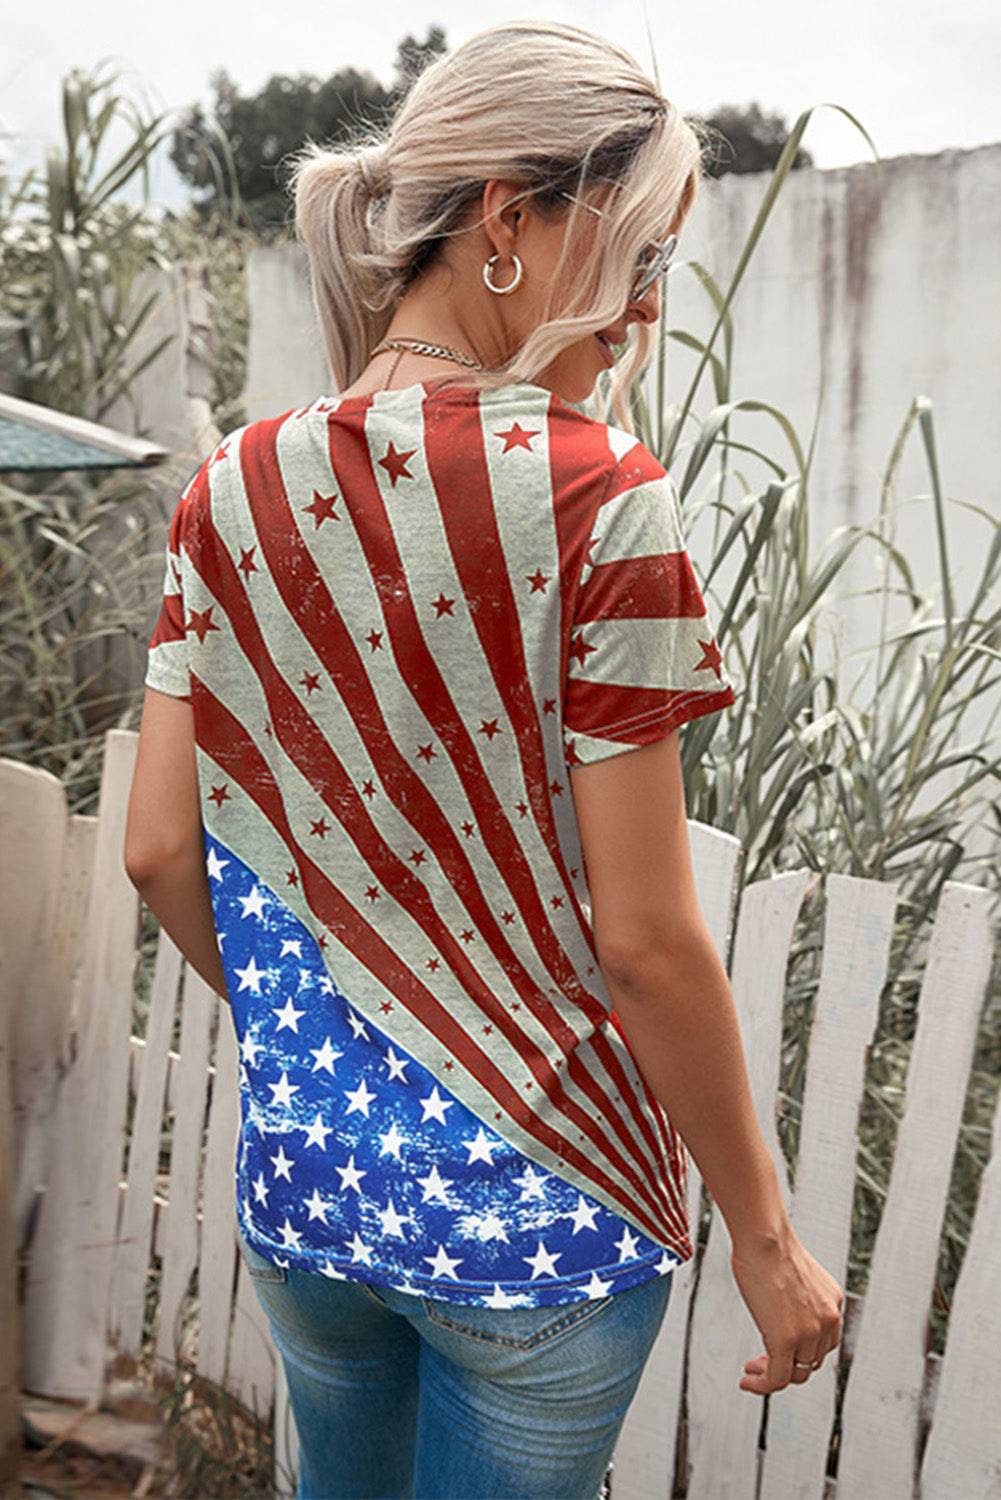 "Star and Stripes V-Neck Tee - Wear your American spirit with pride and elegance" - Guy Christopher 